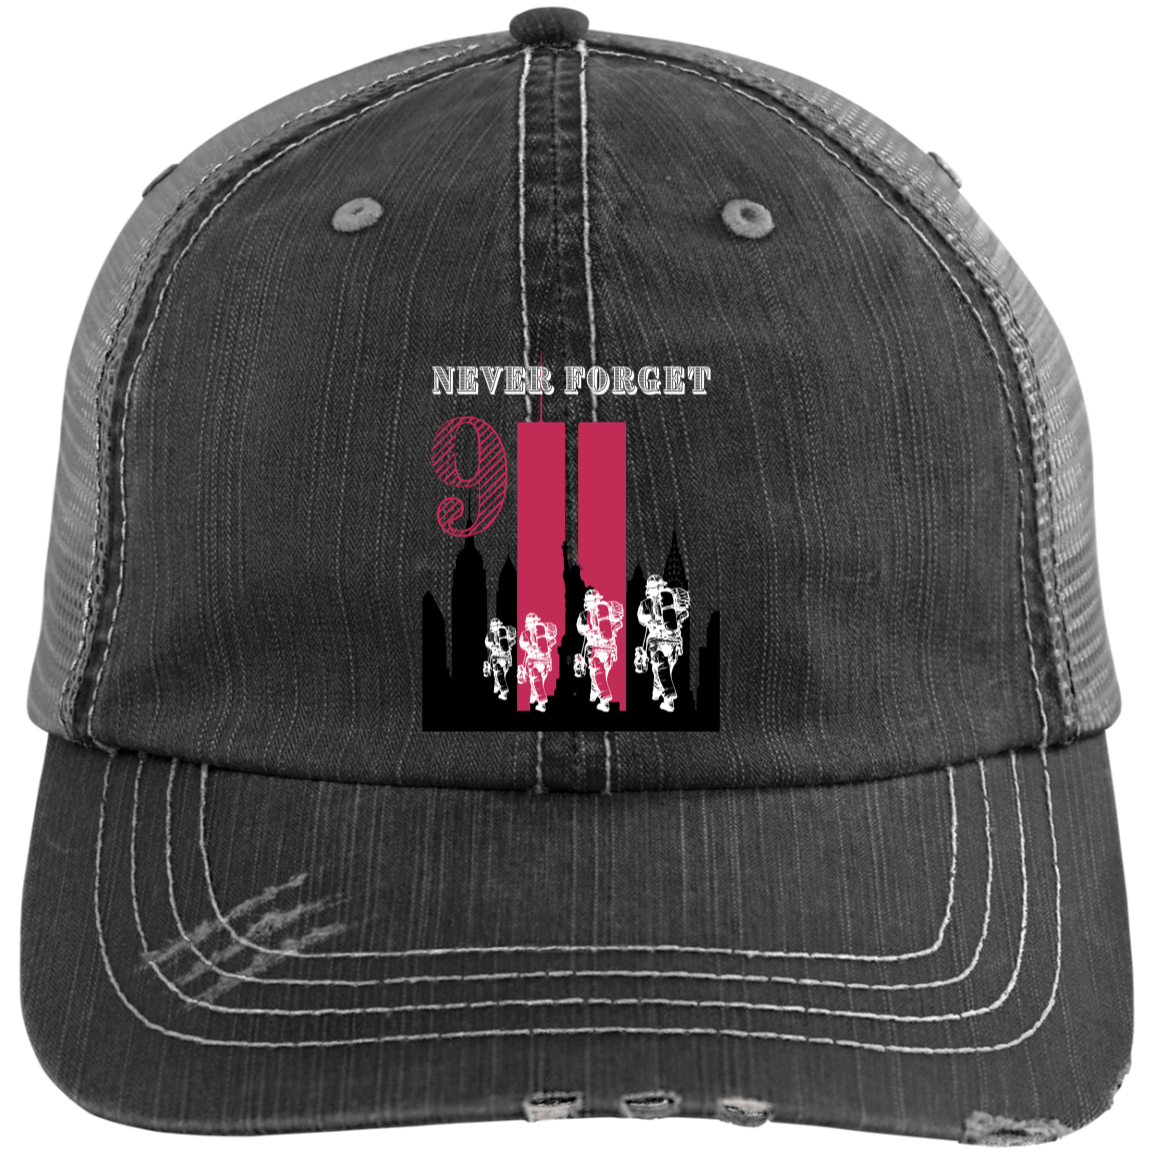 NEVER FORGET  Distressed Unstructured Trucker Cap